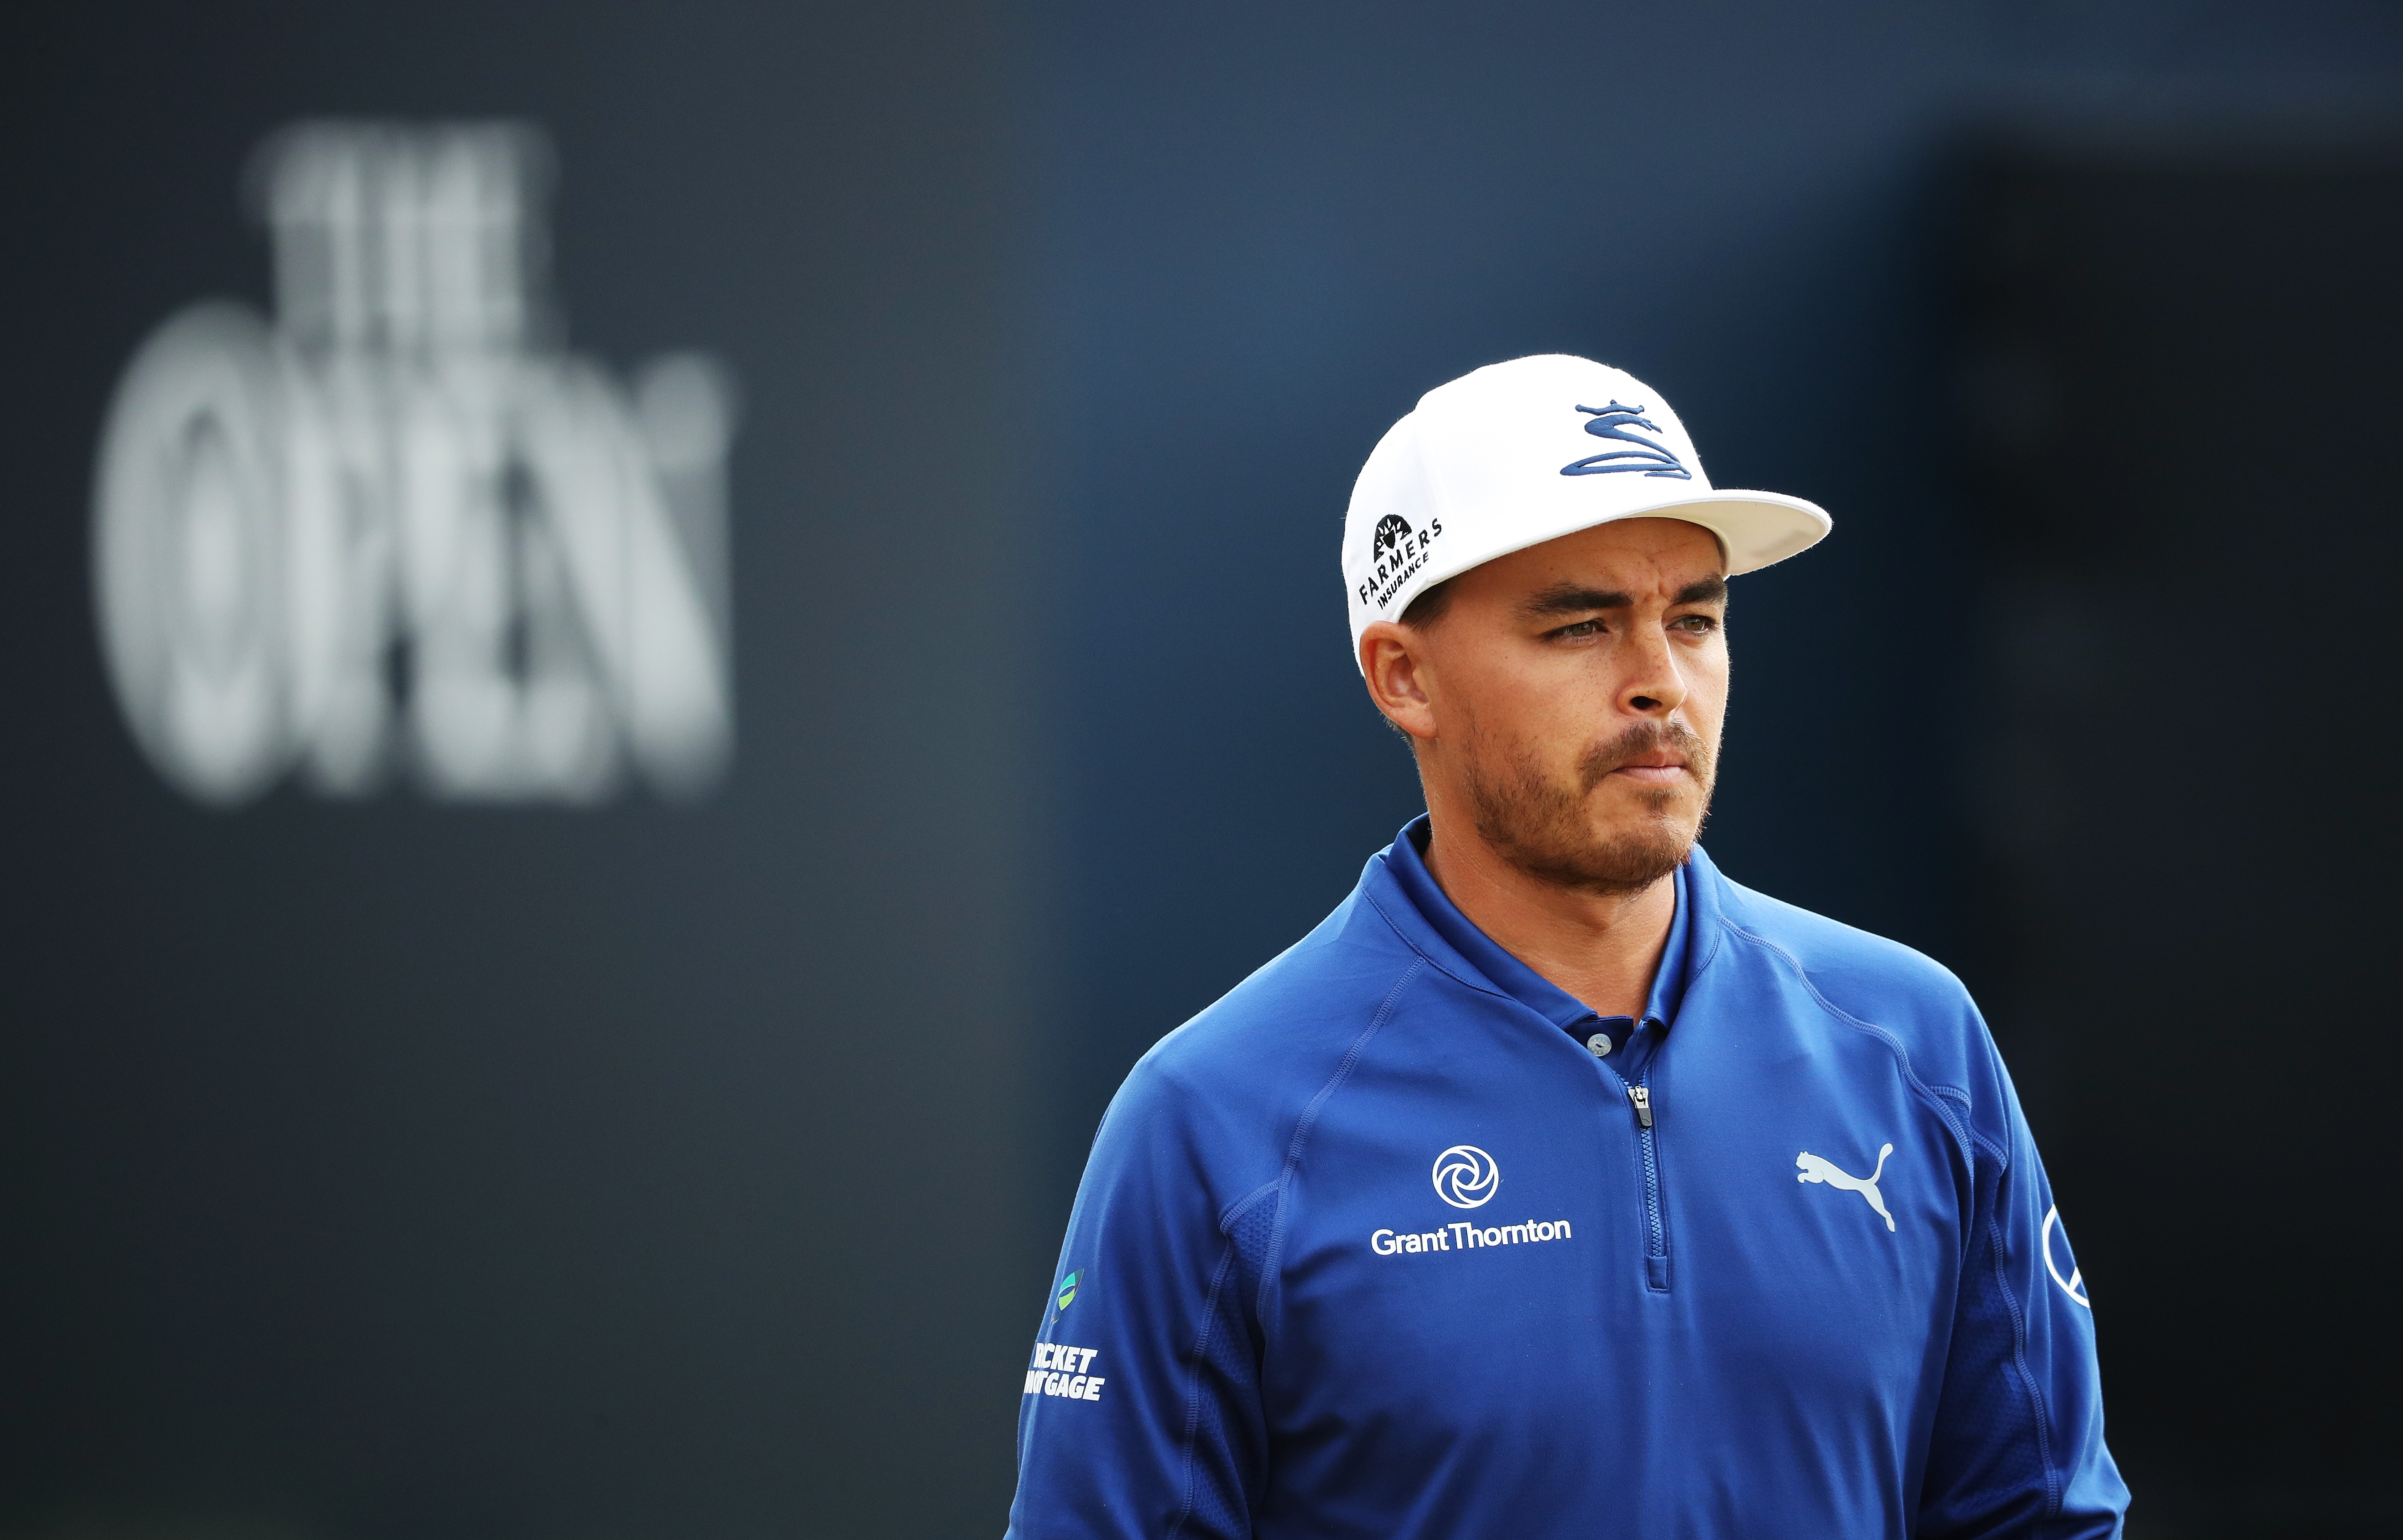 WINNER REVEALED! Rickie Fowler's limited edition Open stand bag